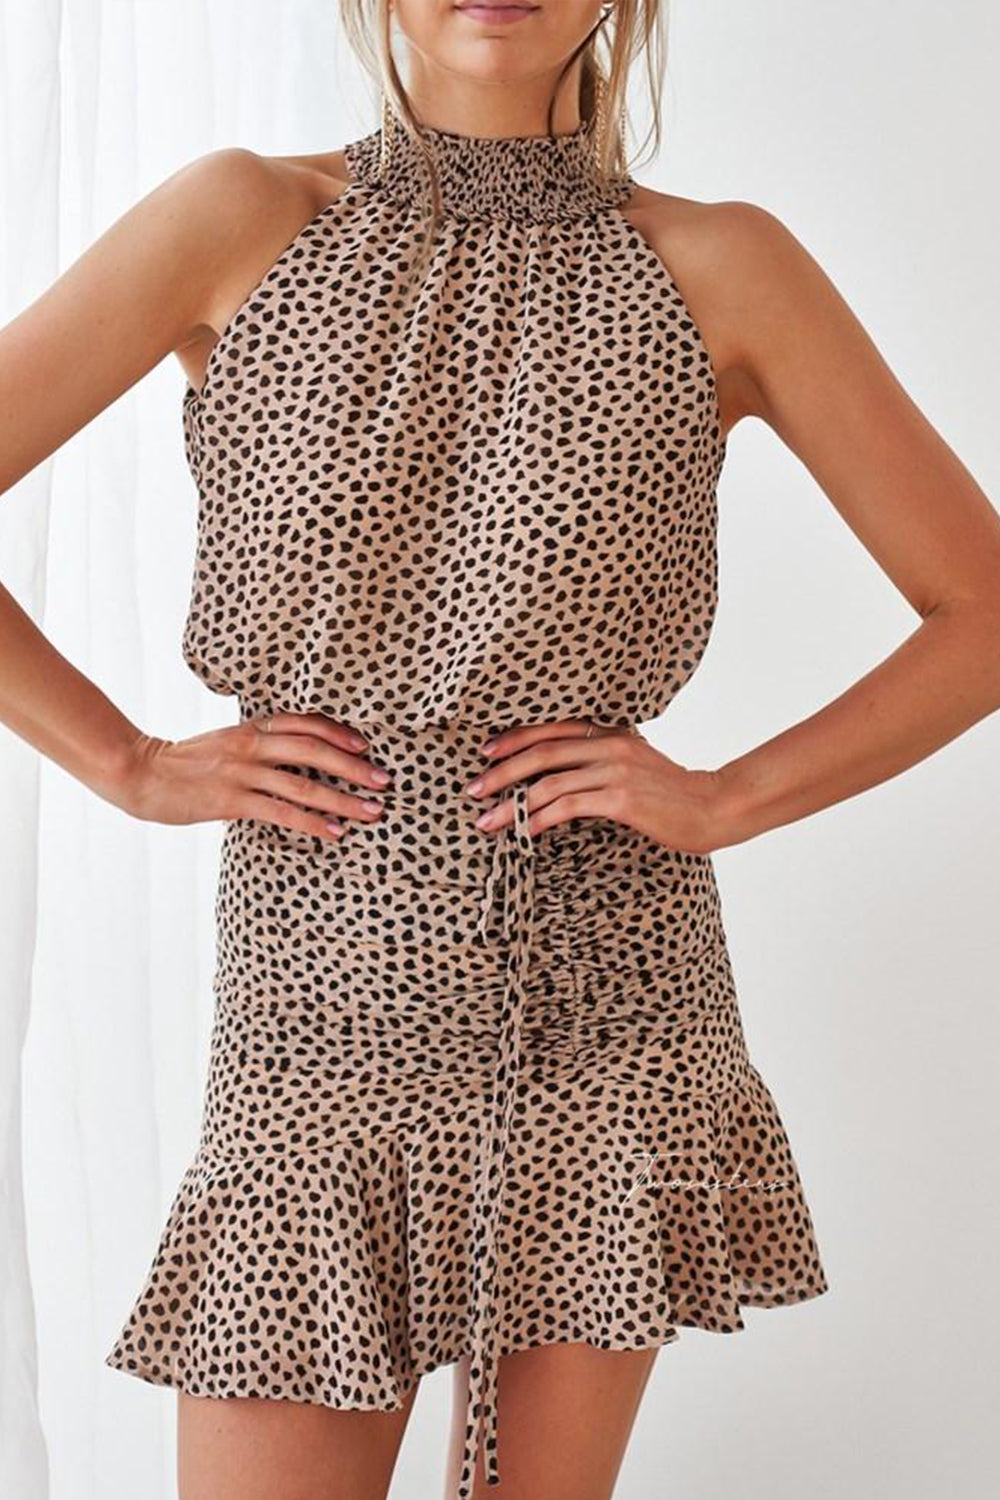 Pip Dress by Twosisters - Leopard